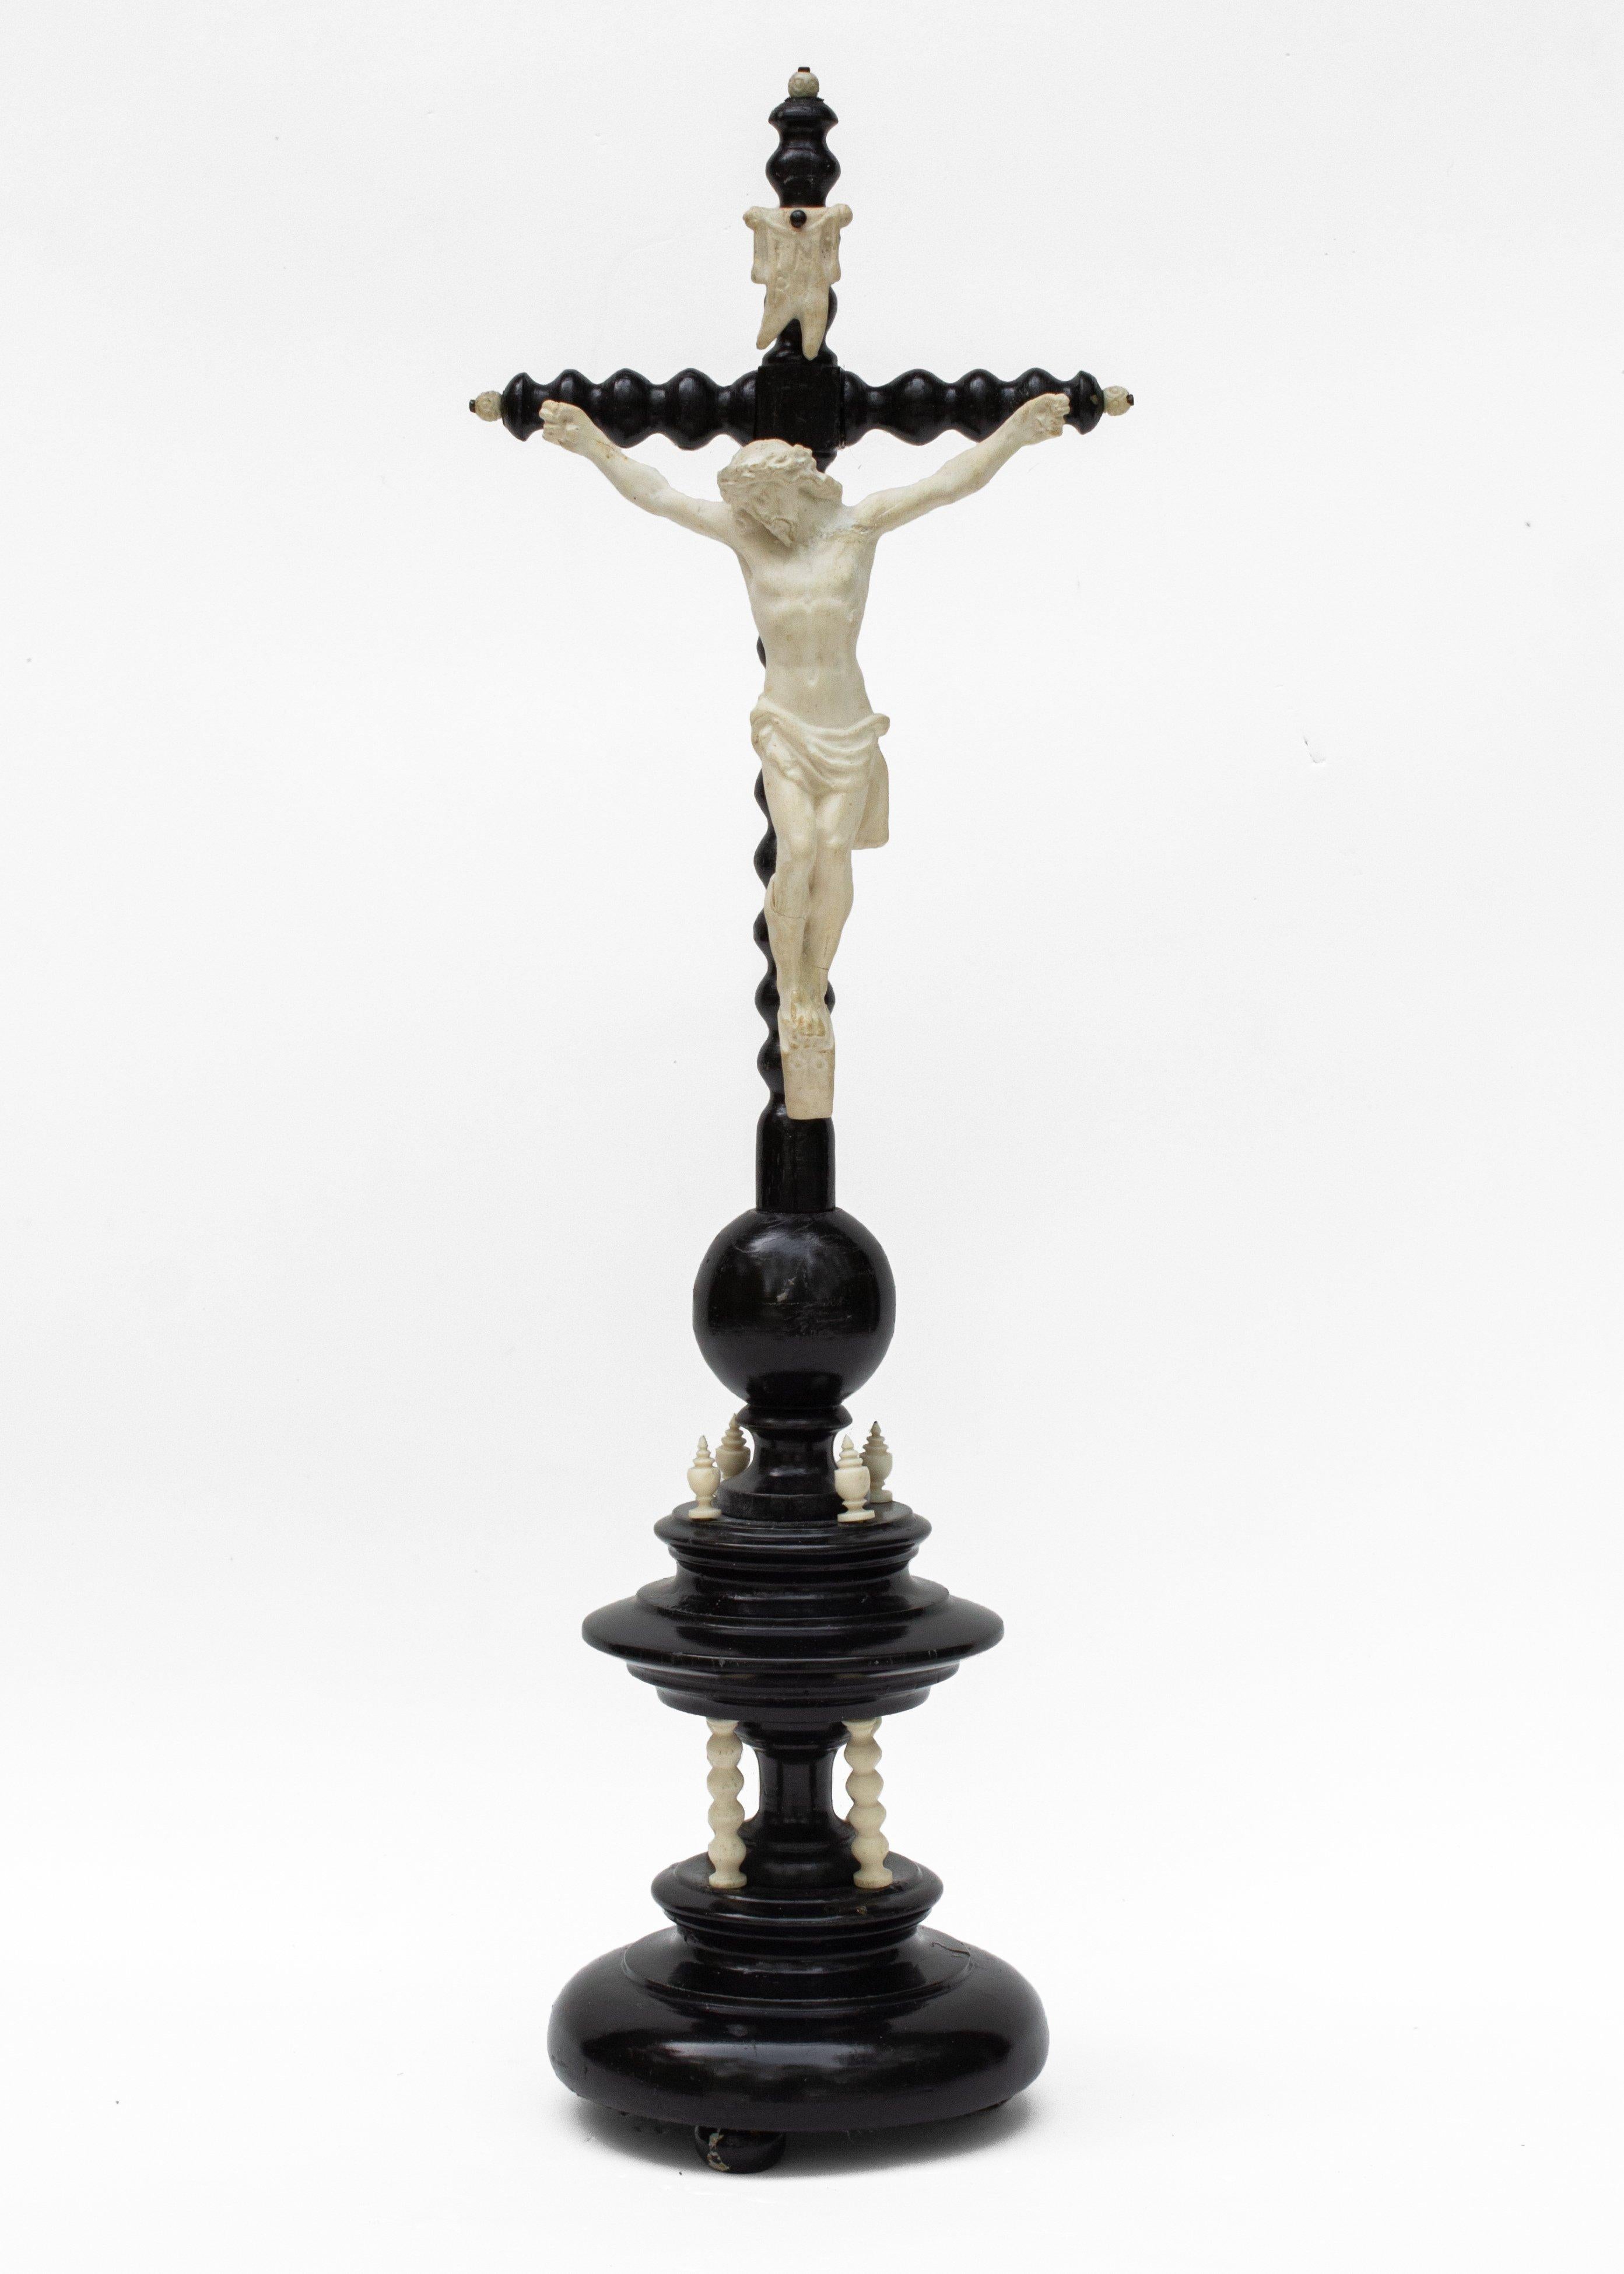 19th century French turned wood crucifix with a porcelain bisque figure of Christ and coordinating cream details. The cream carved wood finials on the double-tiered base of the cross contrast well with the design of the overall piece.

The piece